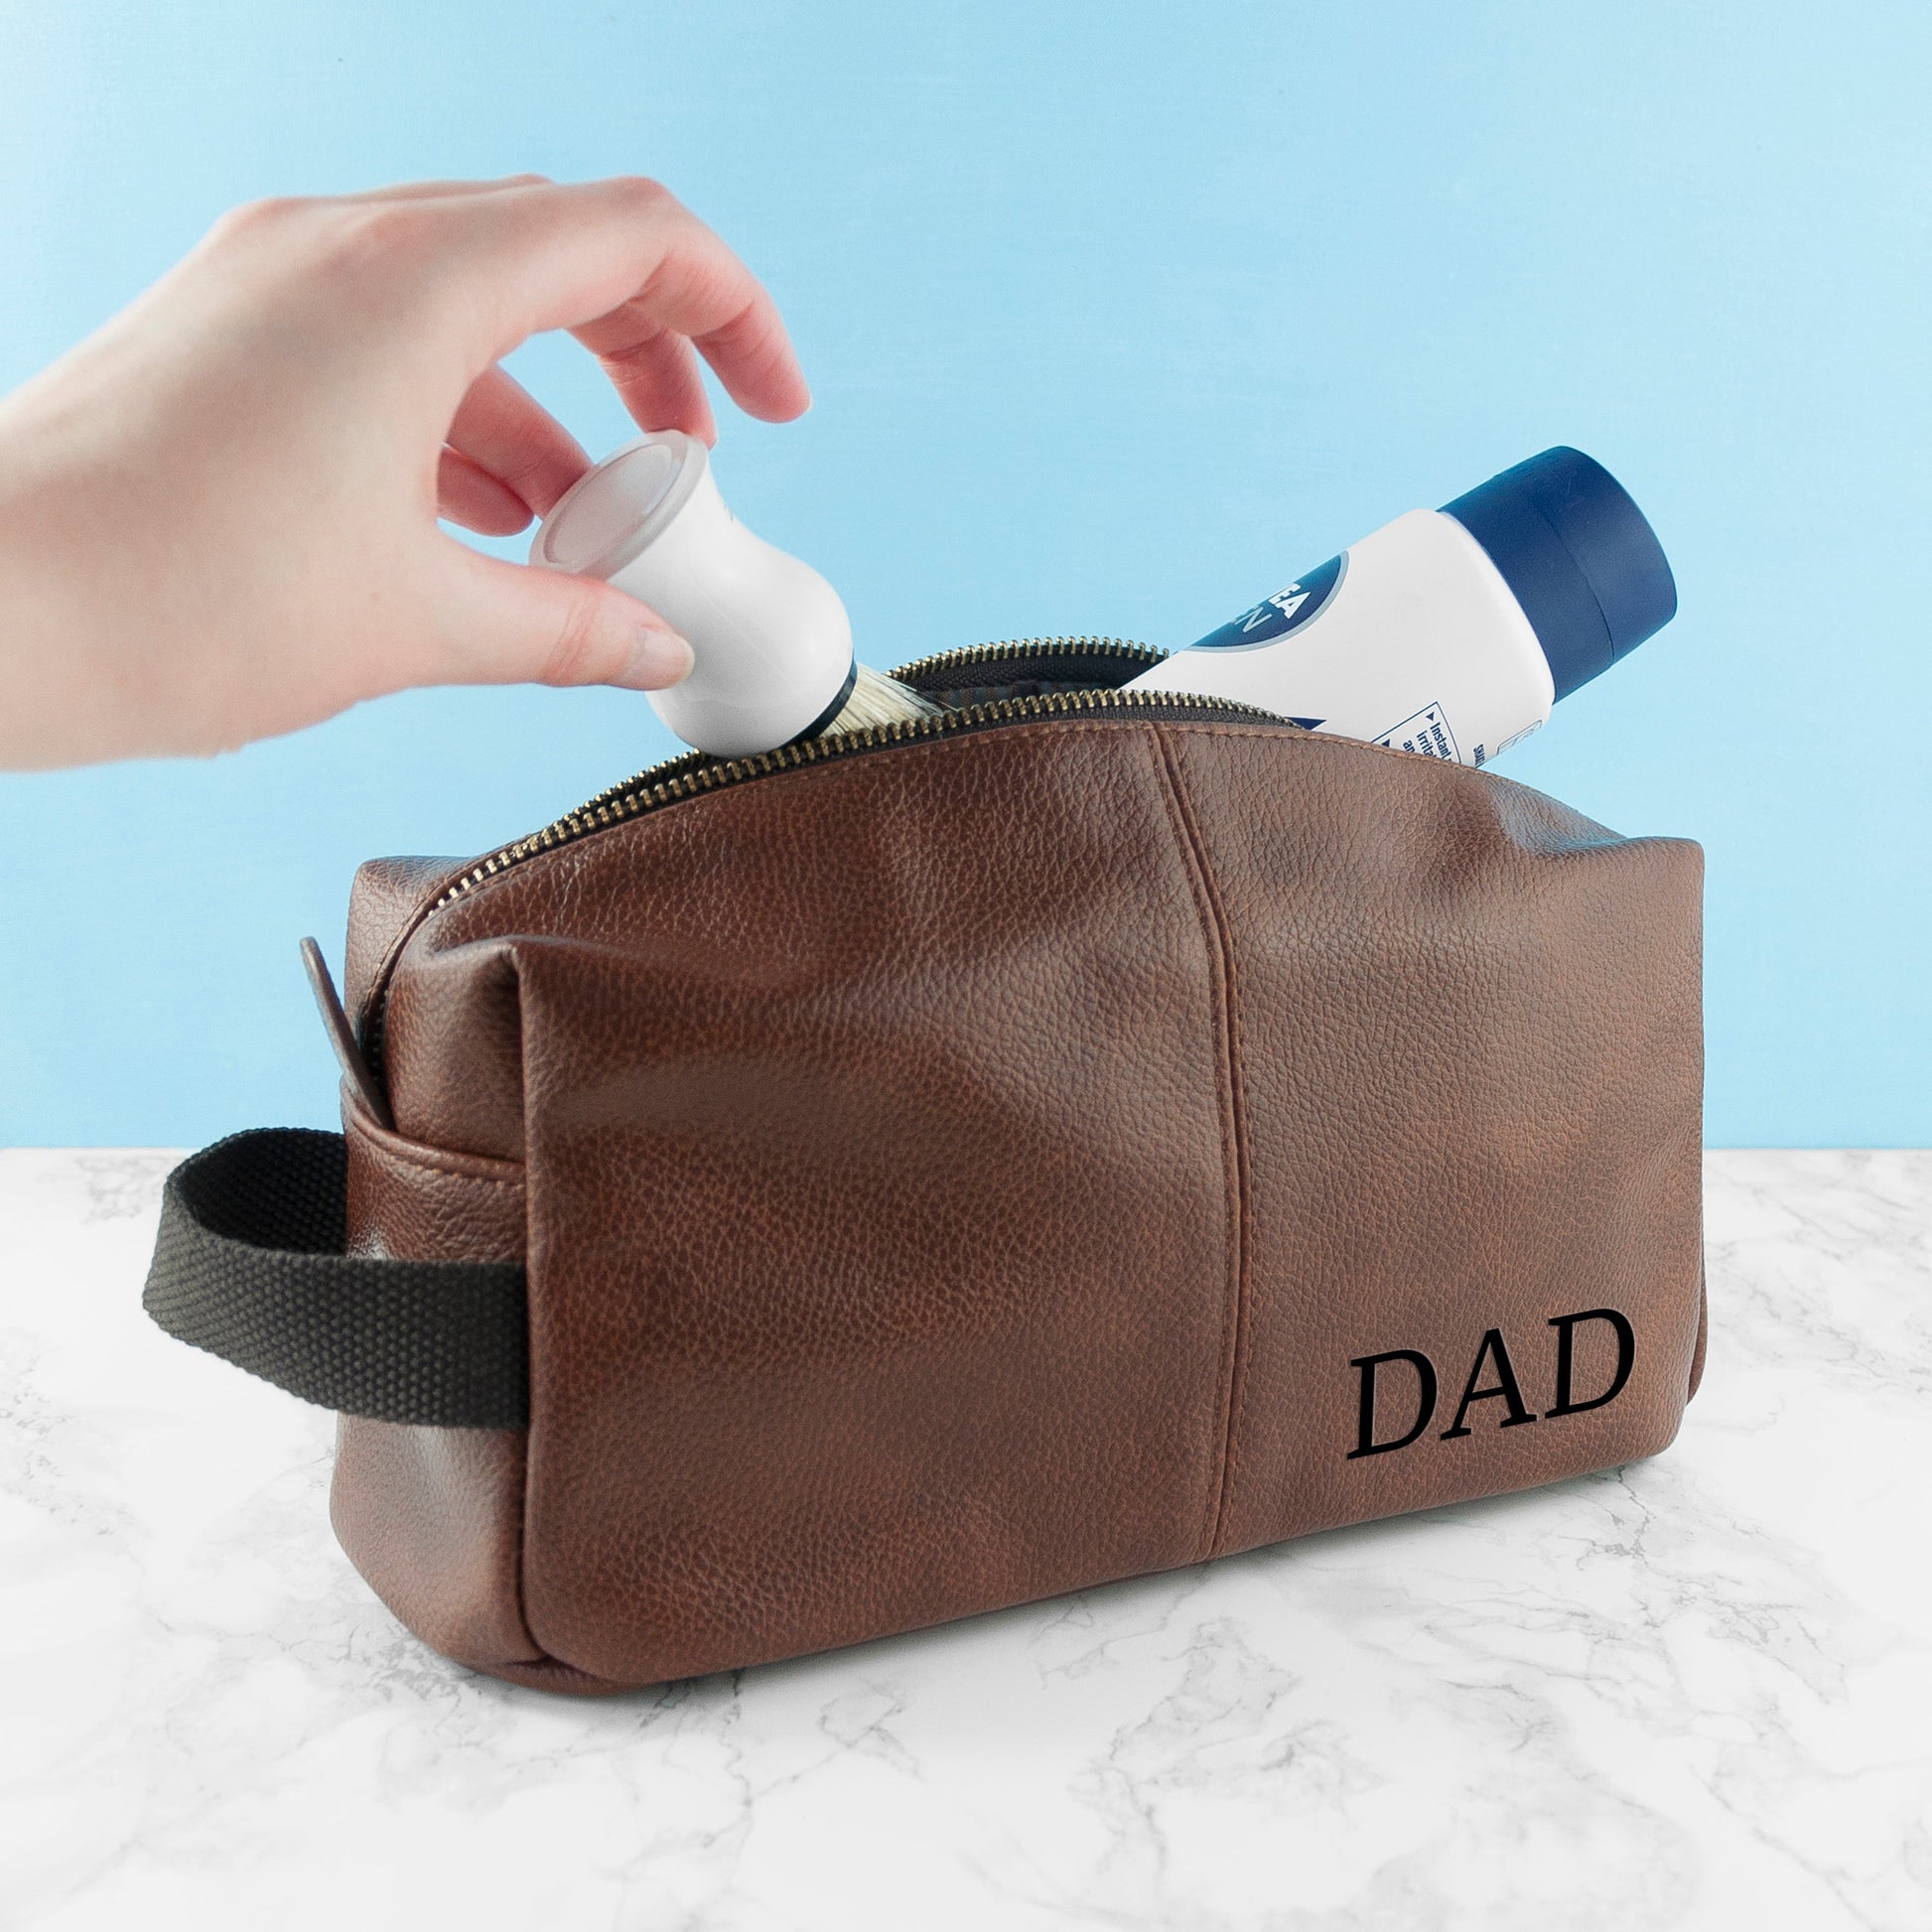 Personalized Men's Washbags - Personalized Dad's Vintage Style Wash Bag 